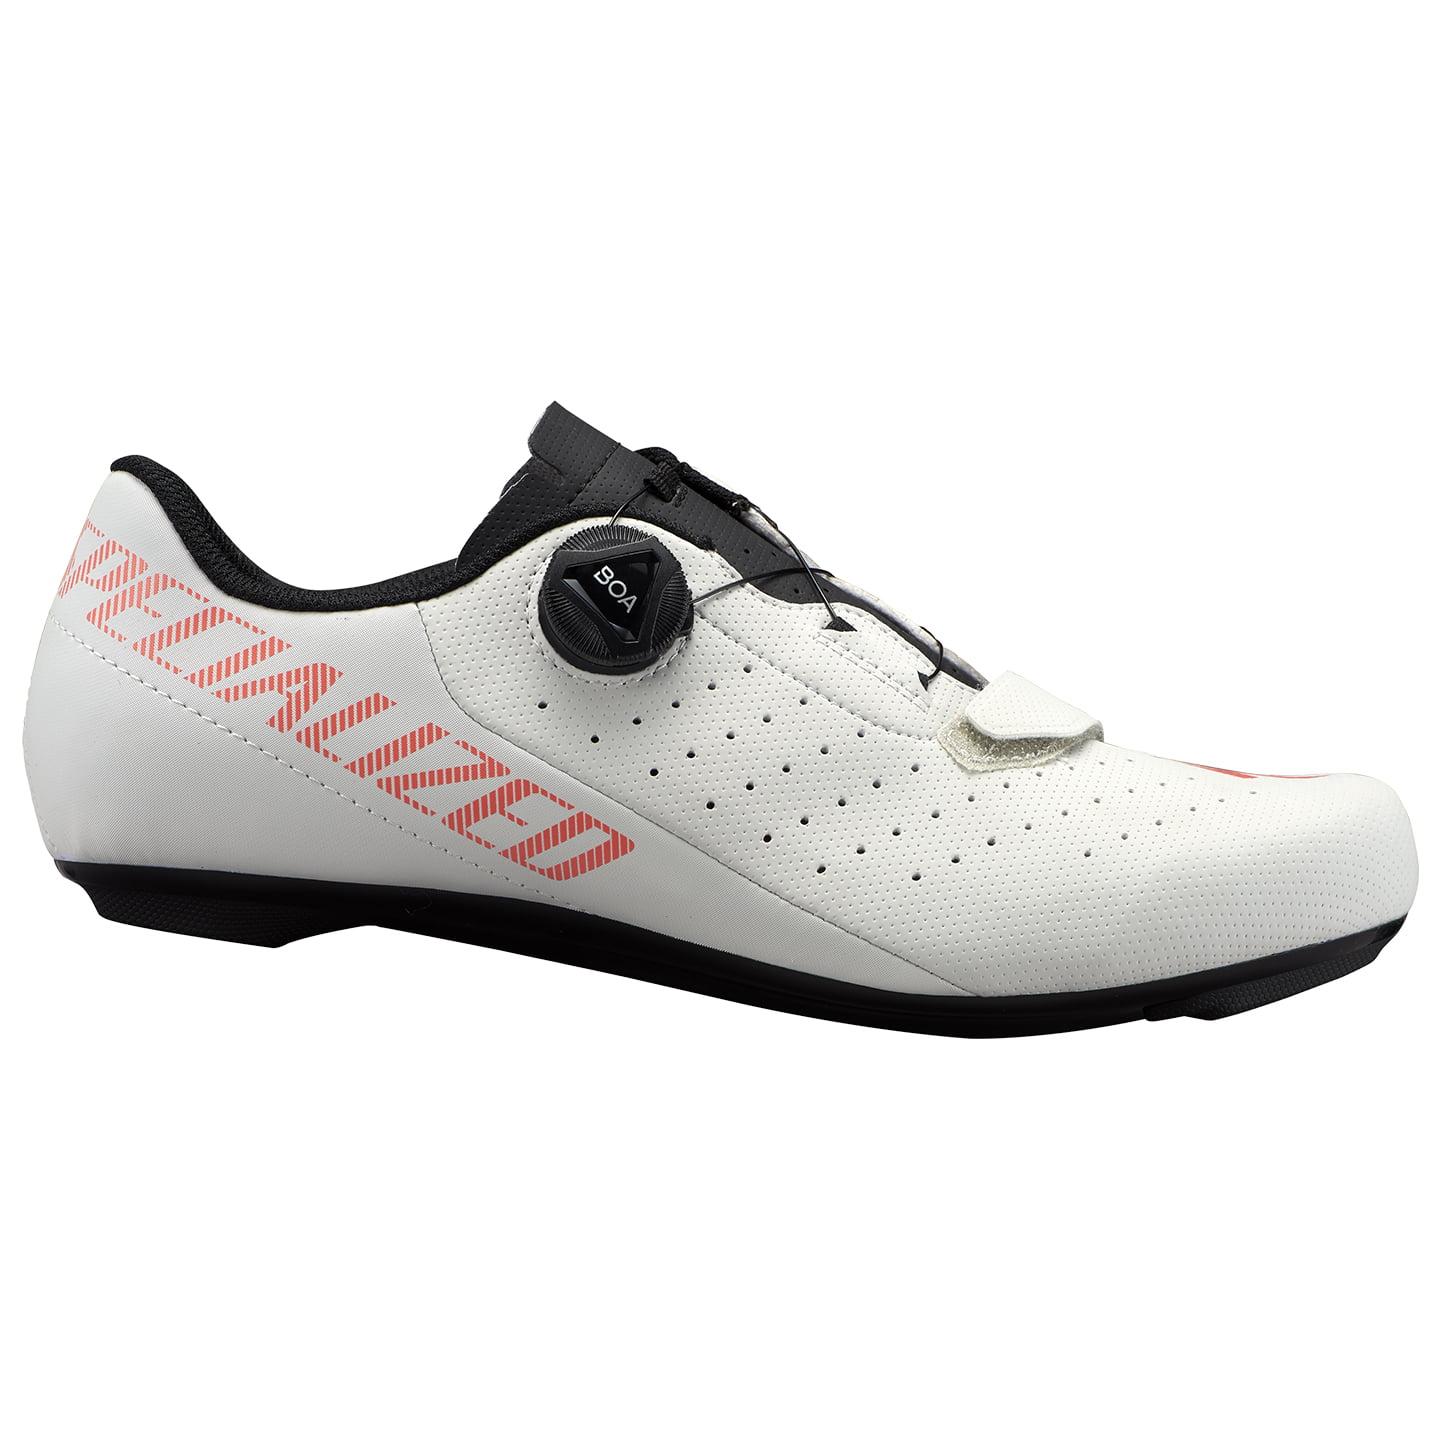 SPECIALIZED Torch 1.0 Road Bike Shoes Road Shoes, for men, size 47, Cycling shoes